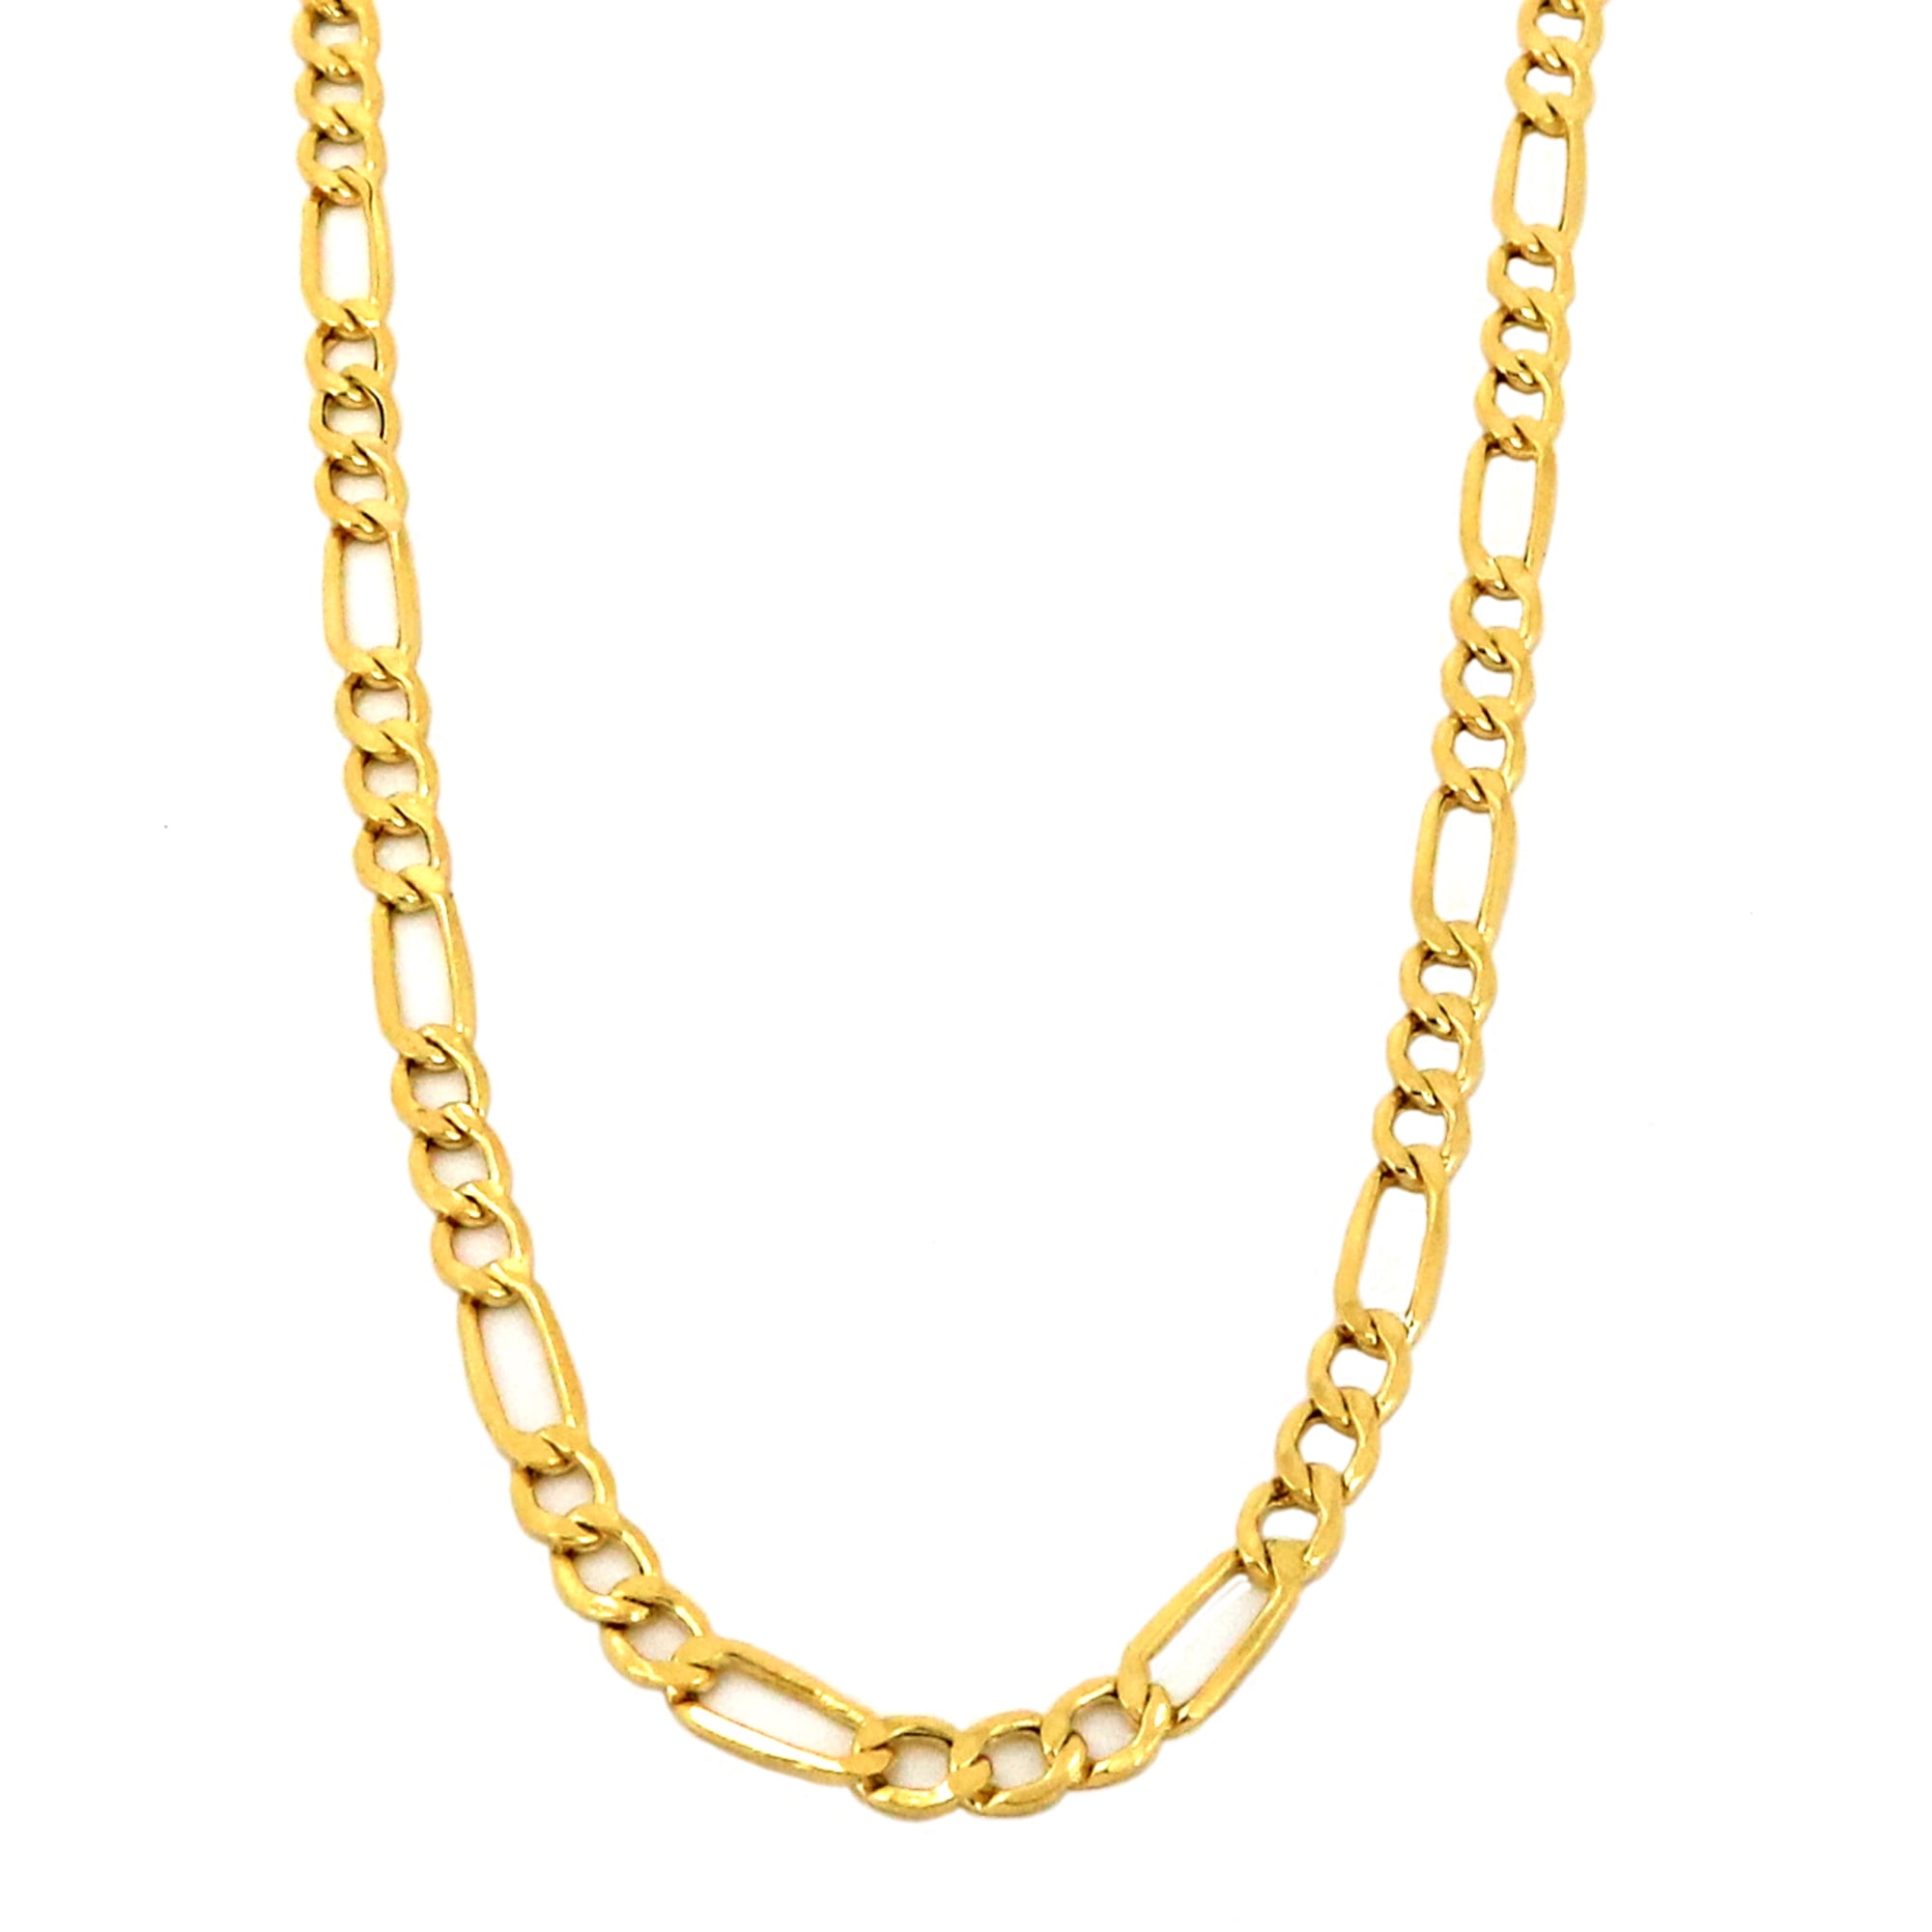 18K Gold Overlay Classic Rope Chain 20" x 2.5mm Heavy Plated GP With Warranty 